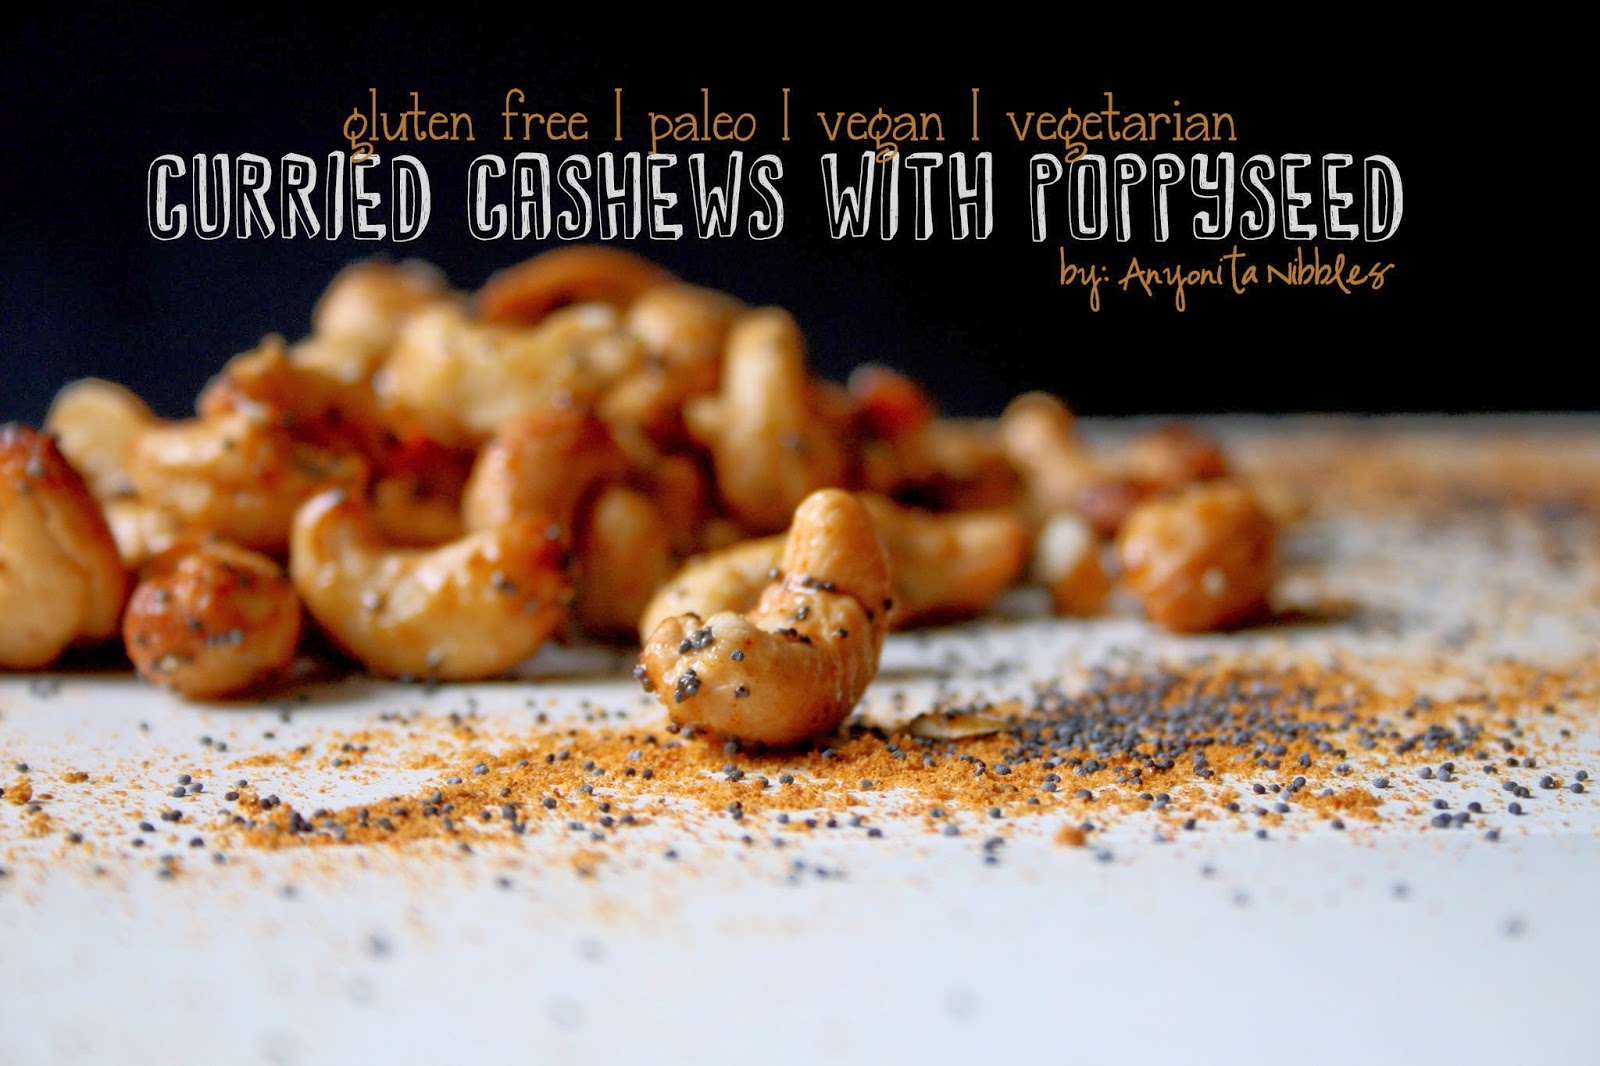 Curried Cashews with Poppyseed